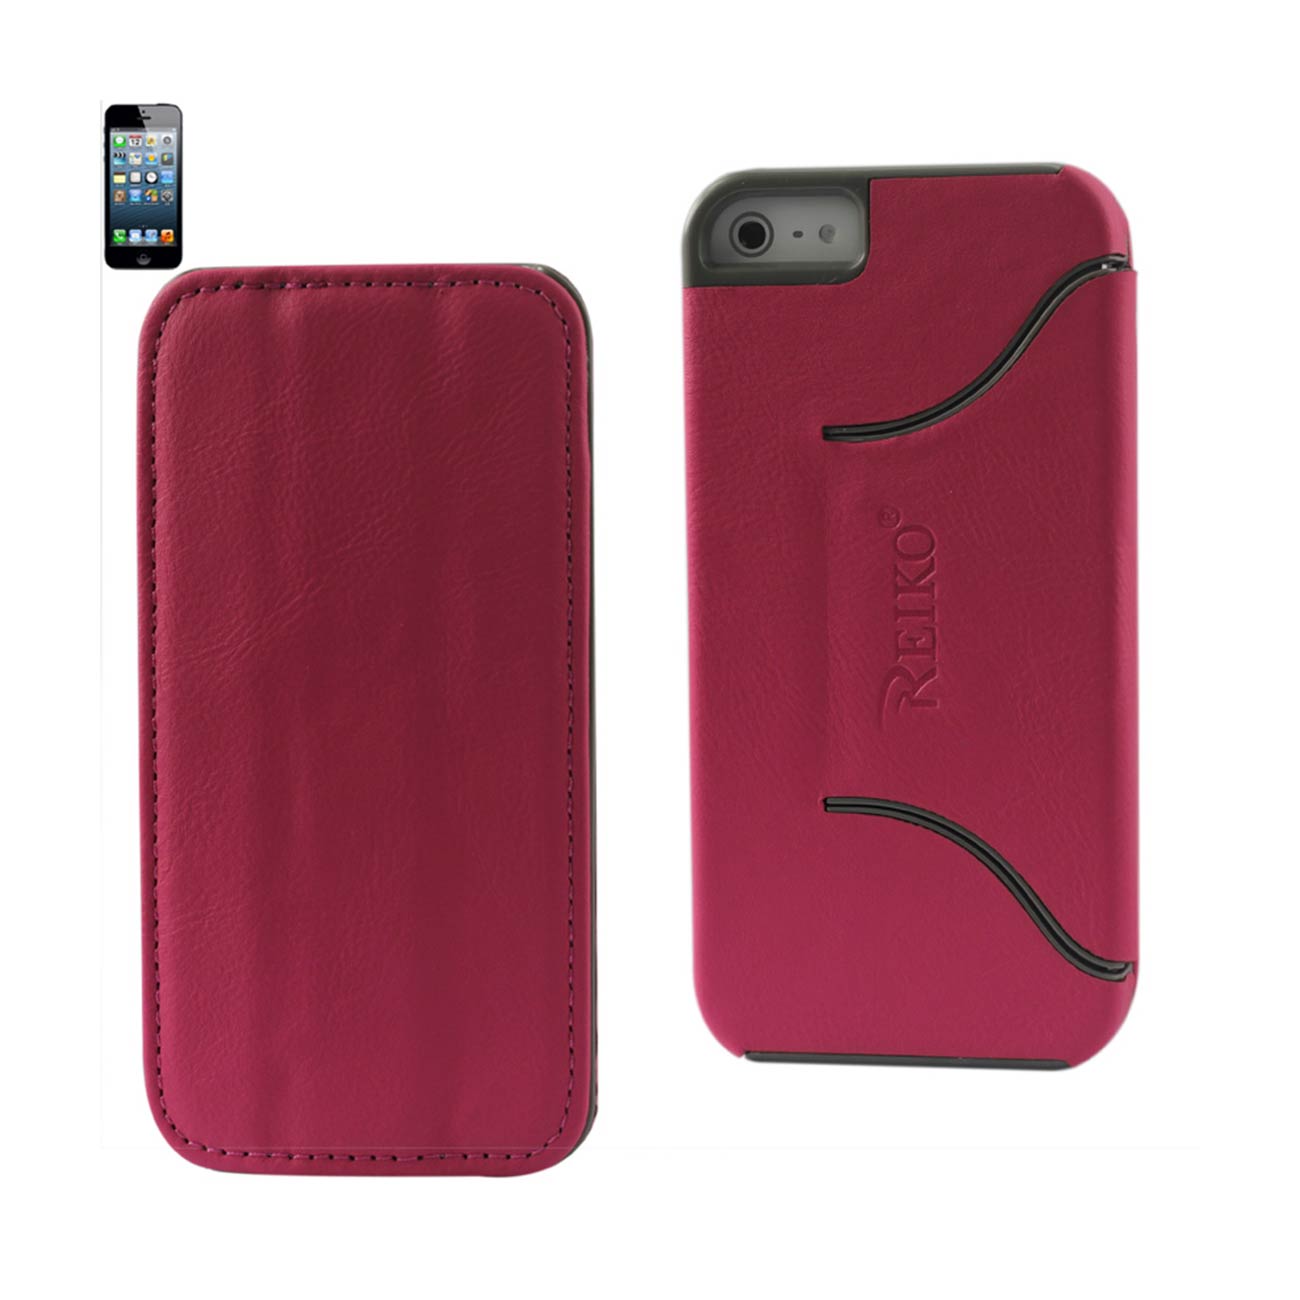 Reiko iPhone Se/ 5S/ 5 Flip Folio Case With Stand In Hot Pink